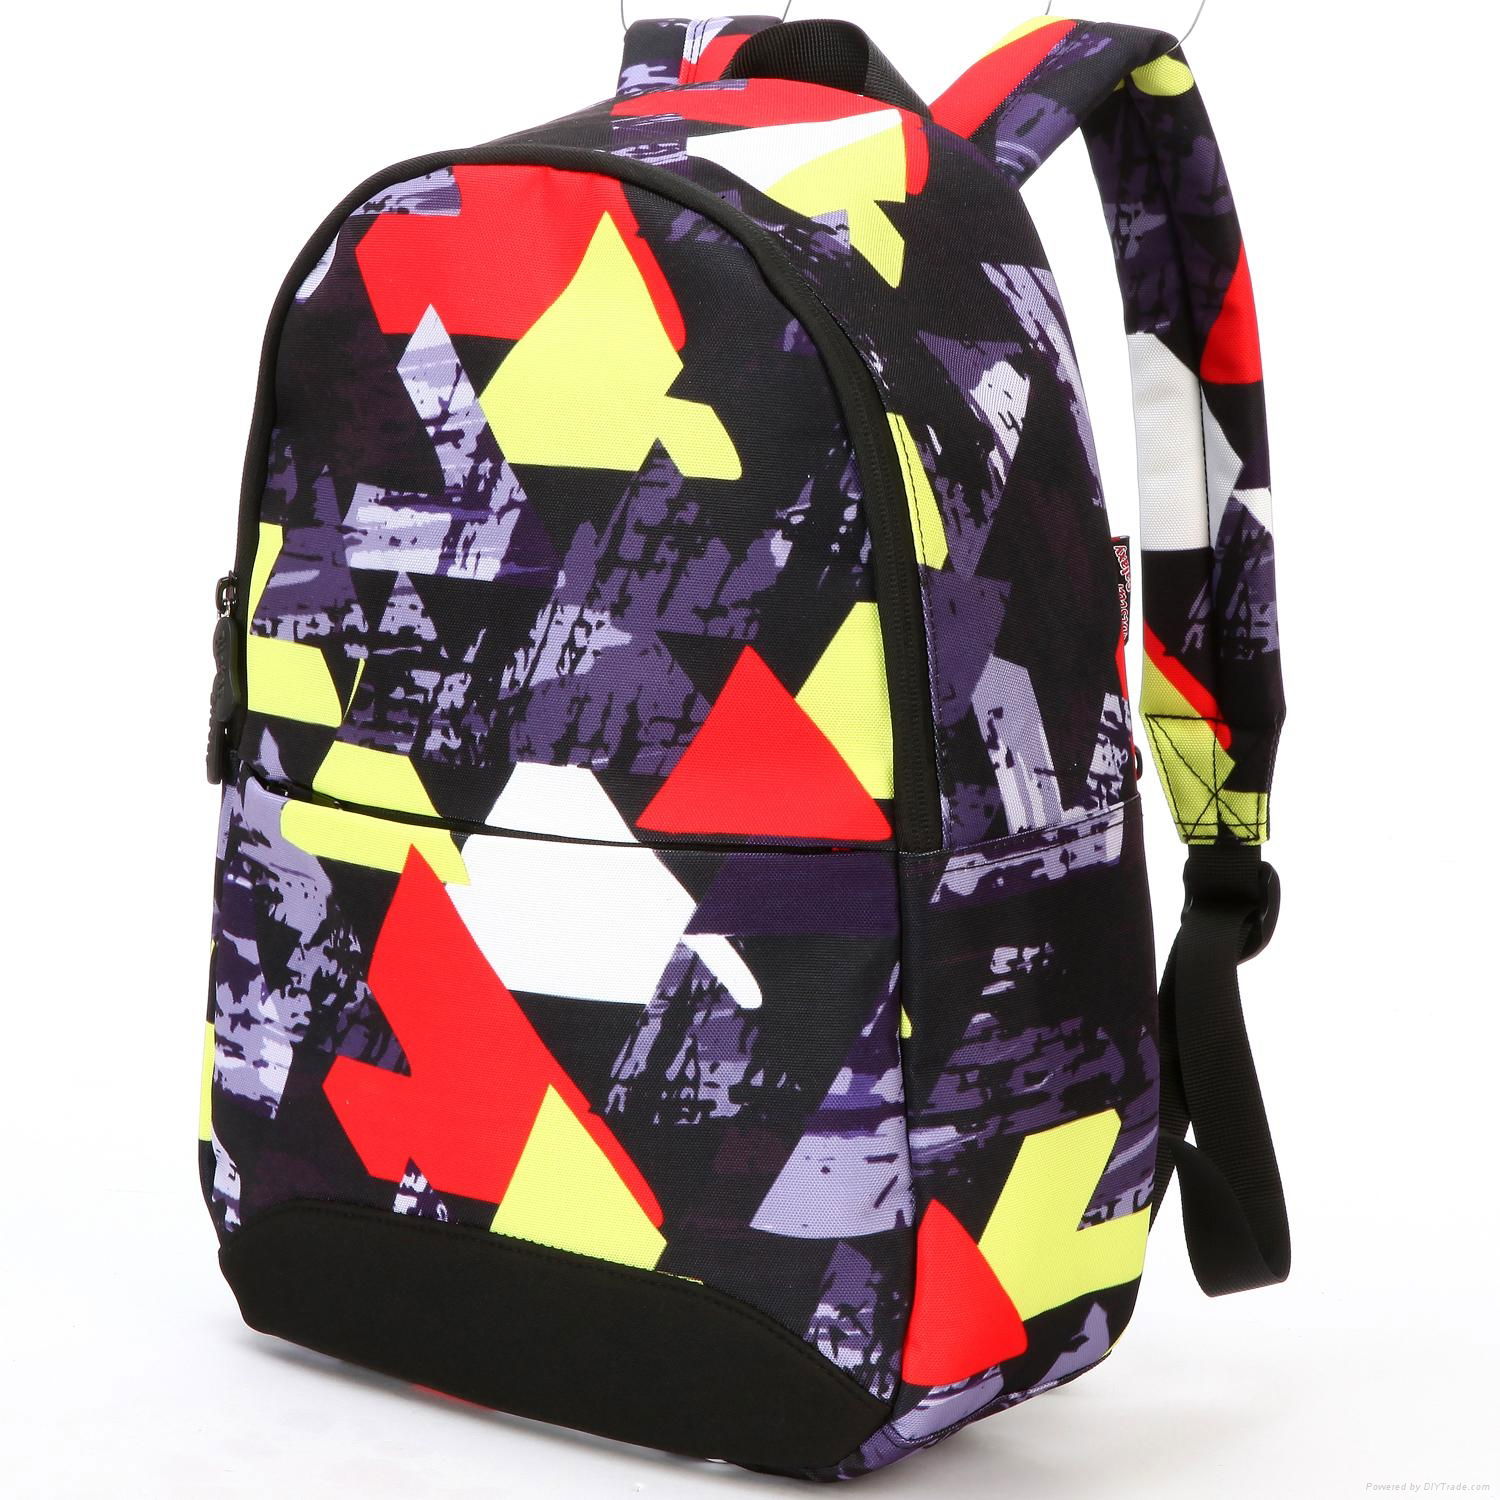 Wholesale fashion girls canavs bag school backpack laptop bags 5